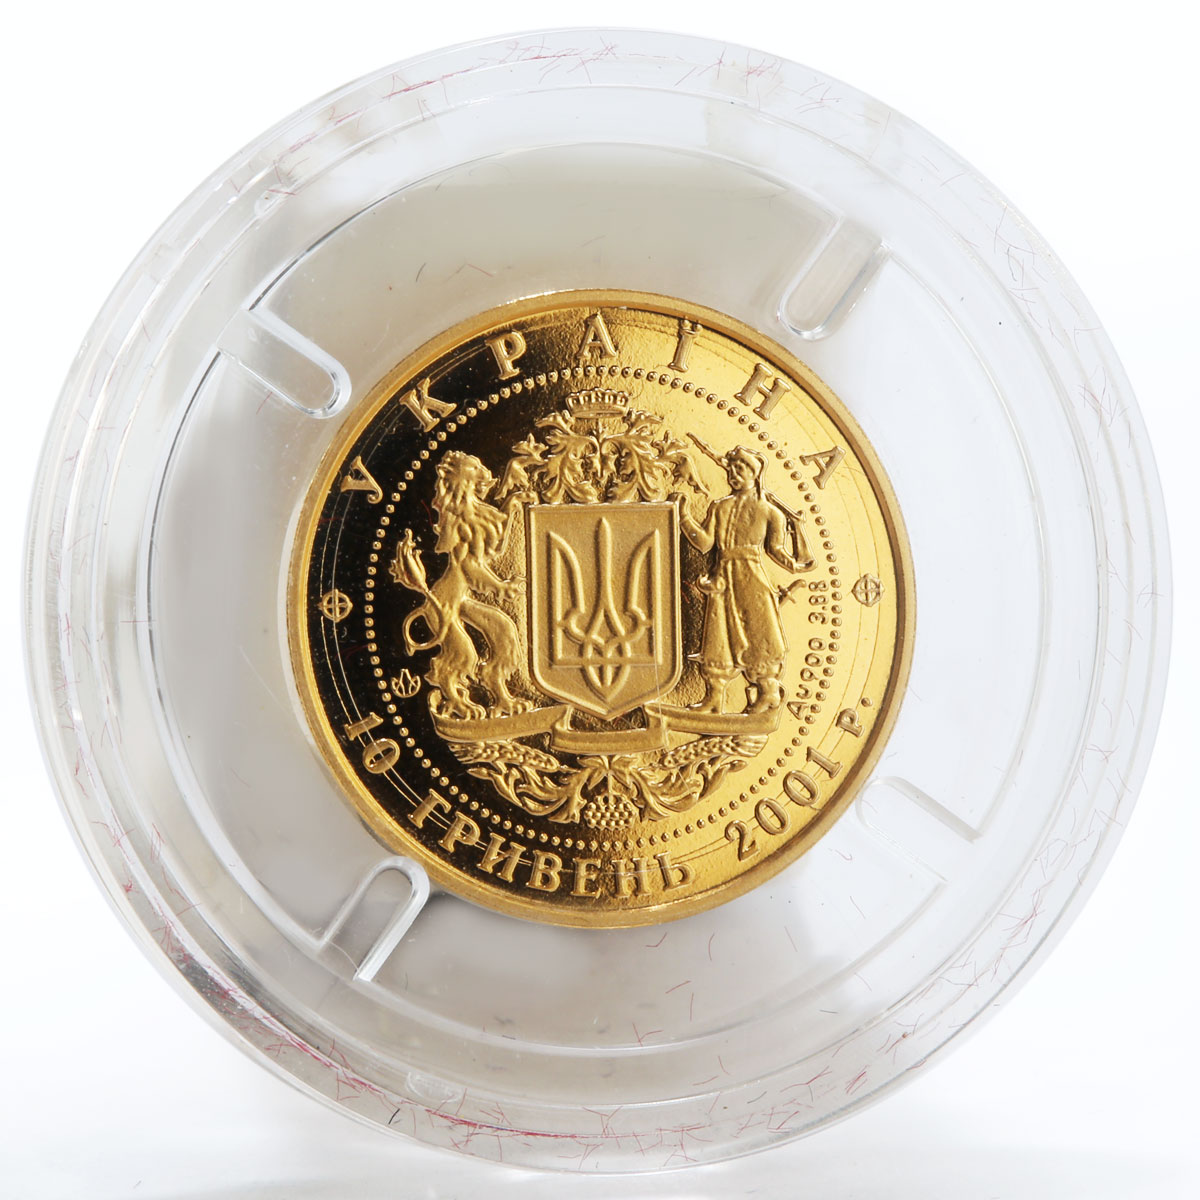 Ukraine 10 hryvnas 10 Years Independence Parliament Map gold coin 2001